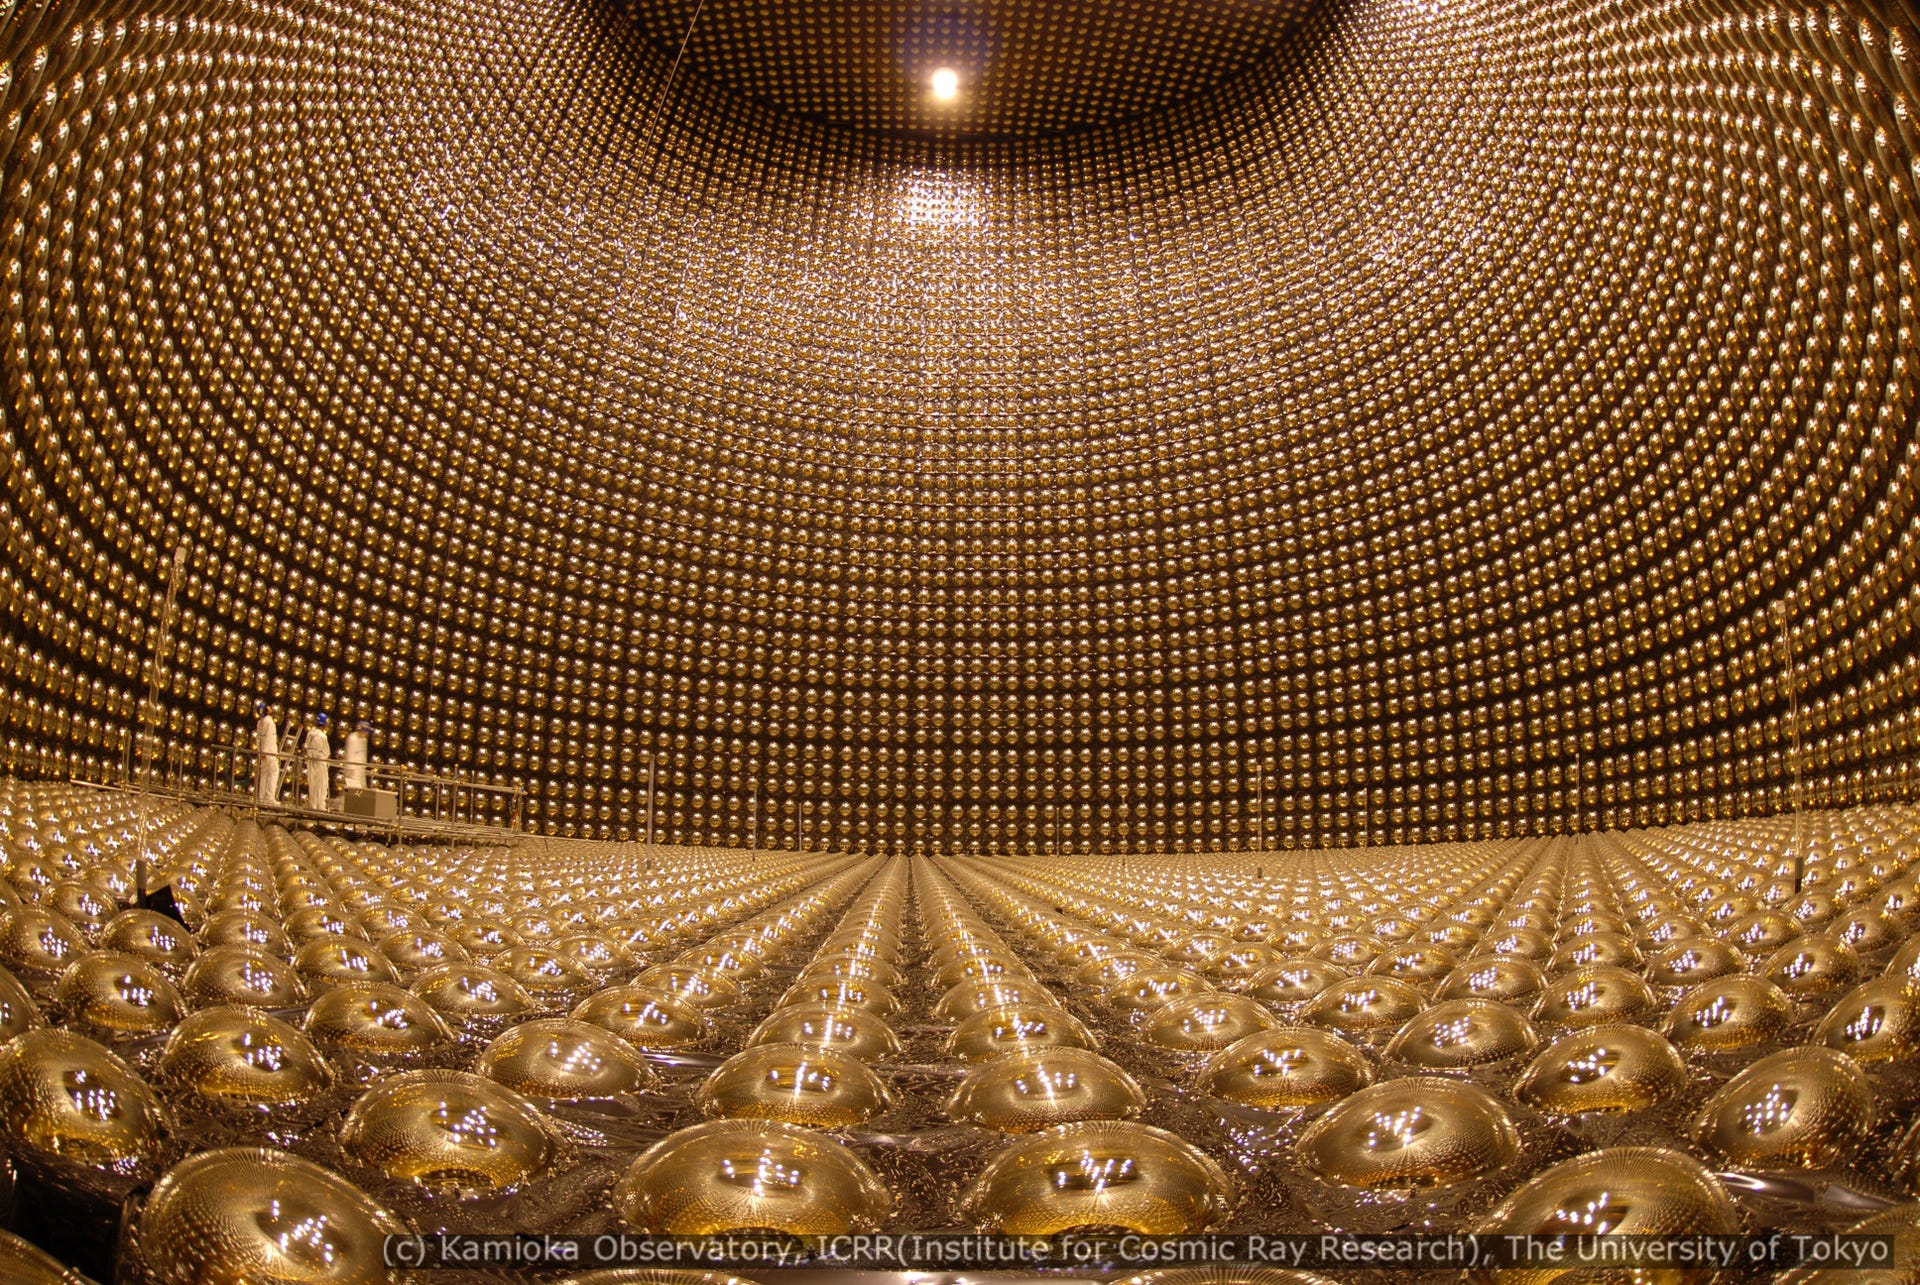 The massive Super-Kamiokande neutrino detector in Japan is studded with thousands of light sensors. It along with a related facility in Canada were responsible for detecting neutrino behavior that meant the particles had mass.